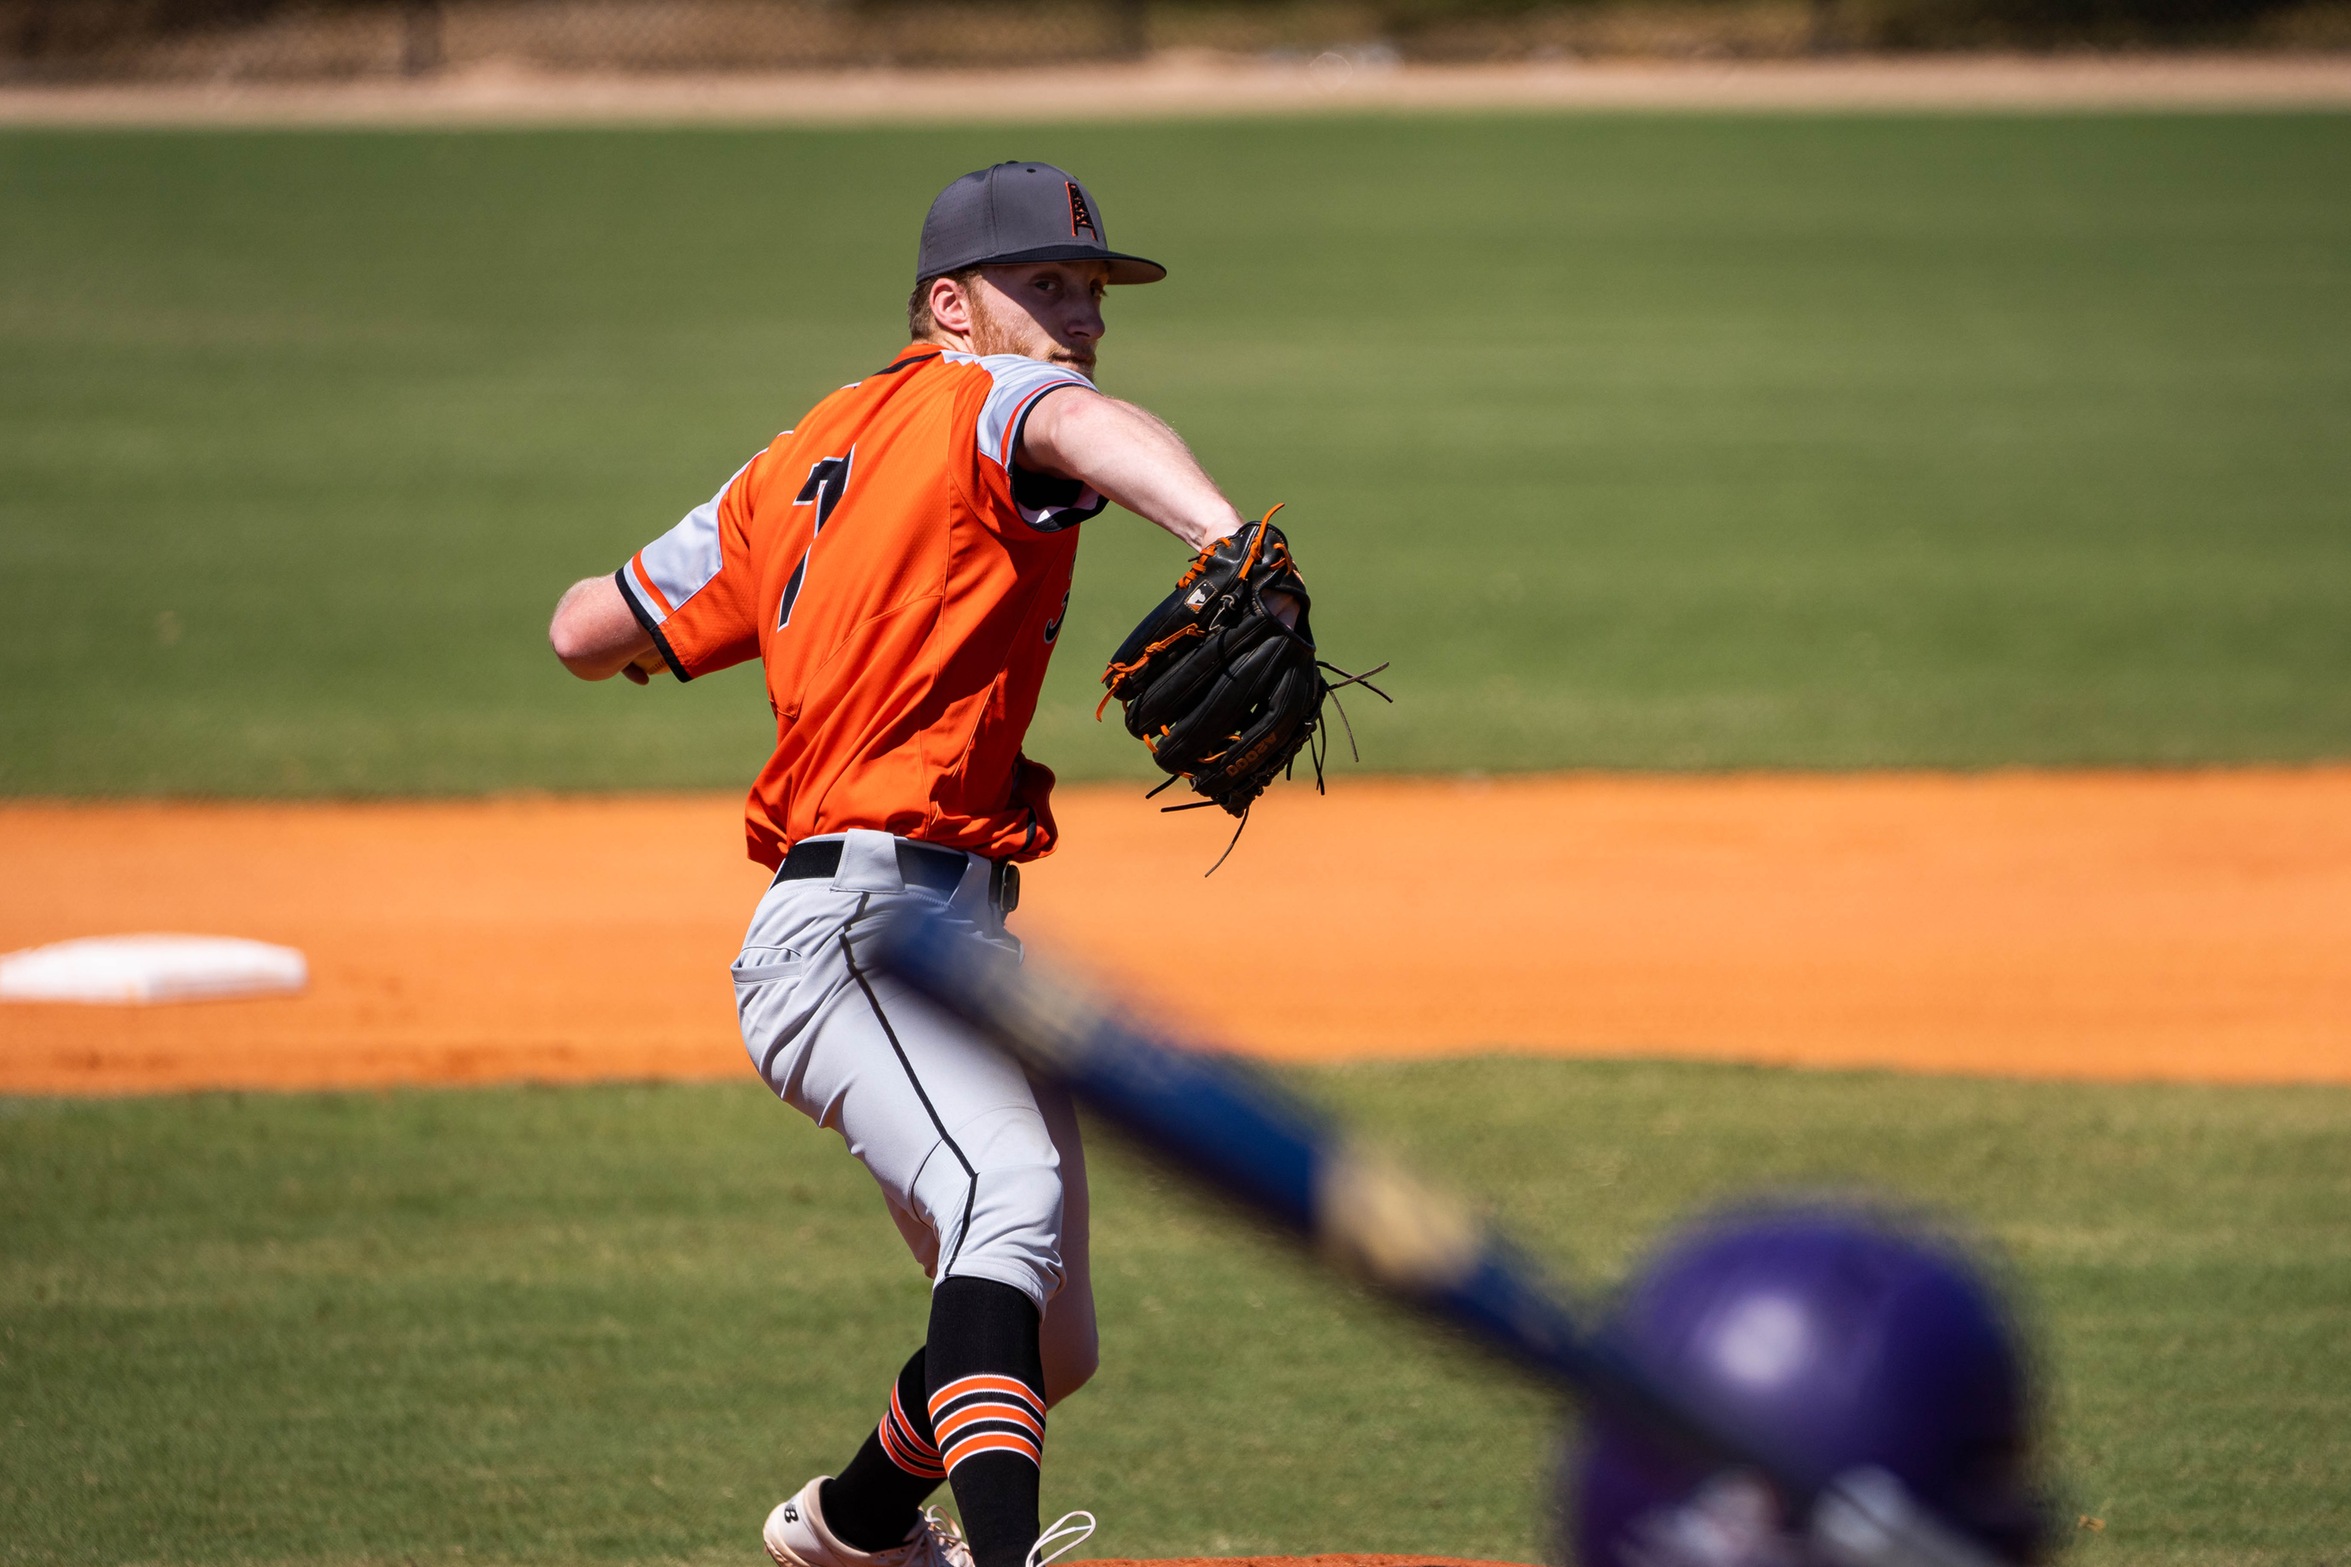 player in orange pitching ball to batter